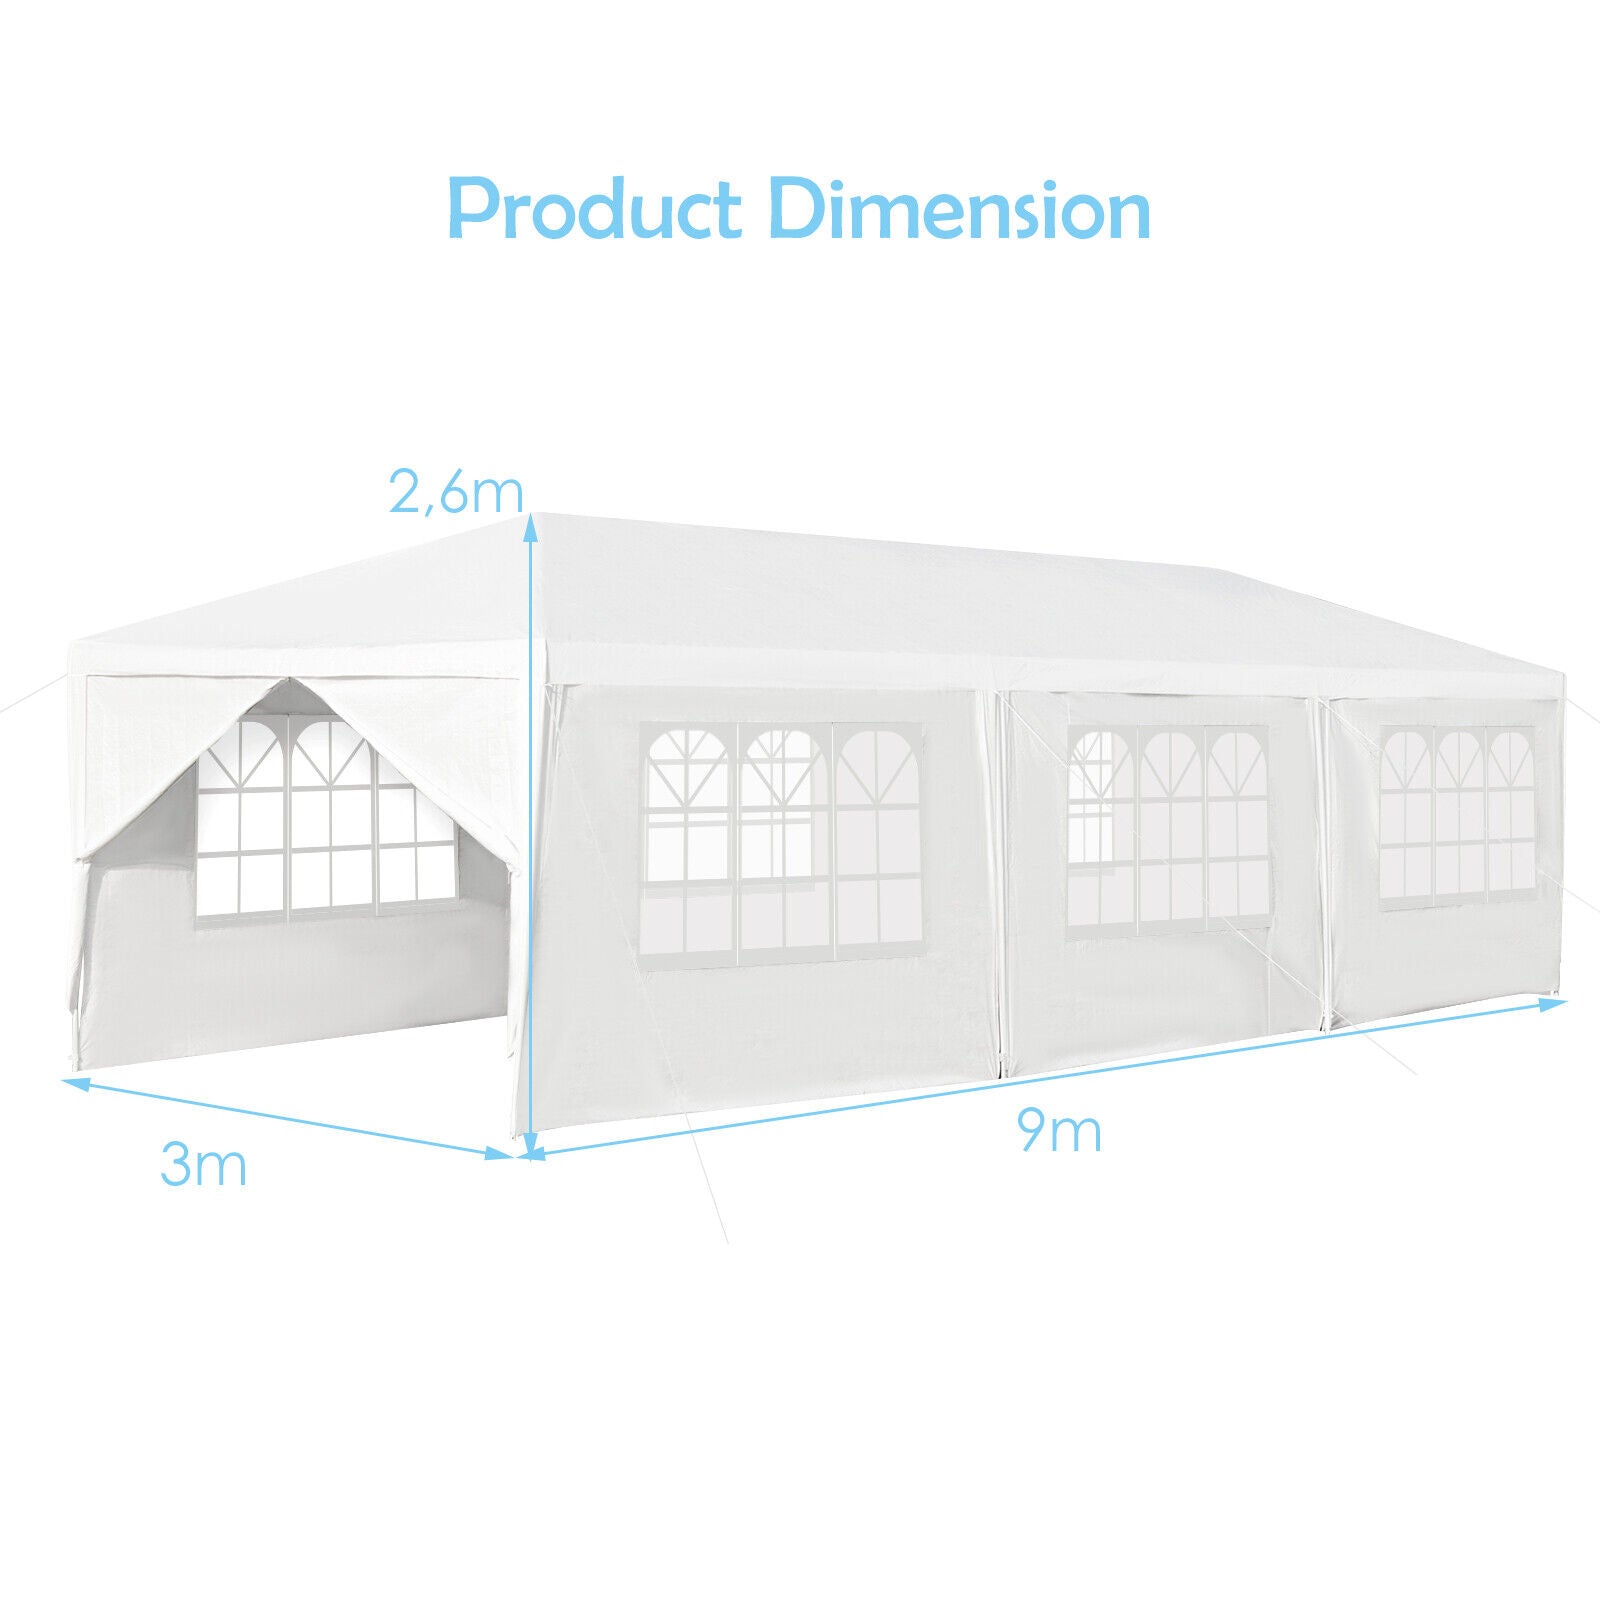 3m x 9m Heavy duty Outdoor Party Wedding Tent Canopy Gazebo with removable sidewalls